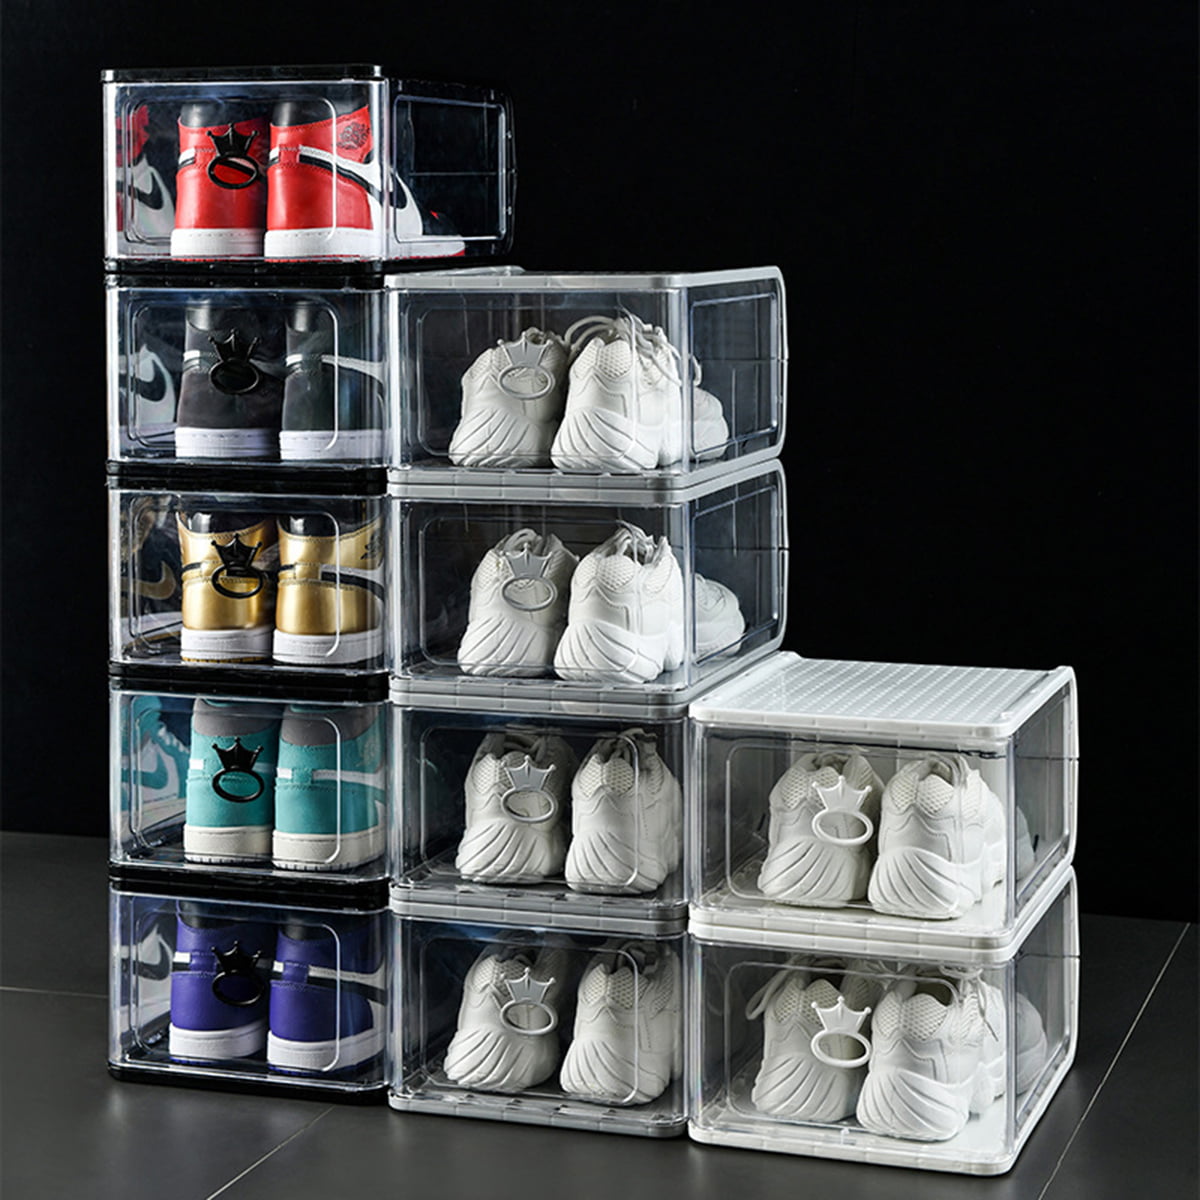 4Pcs Shoe Boxes Clear Plastic Stackable Storage Containers with Lids Drawer Type Shoe Box Organizer for Ladies and Men Collection Display Cabinet Space Saving,Clear